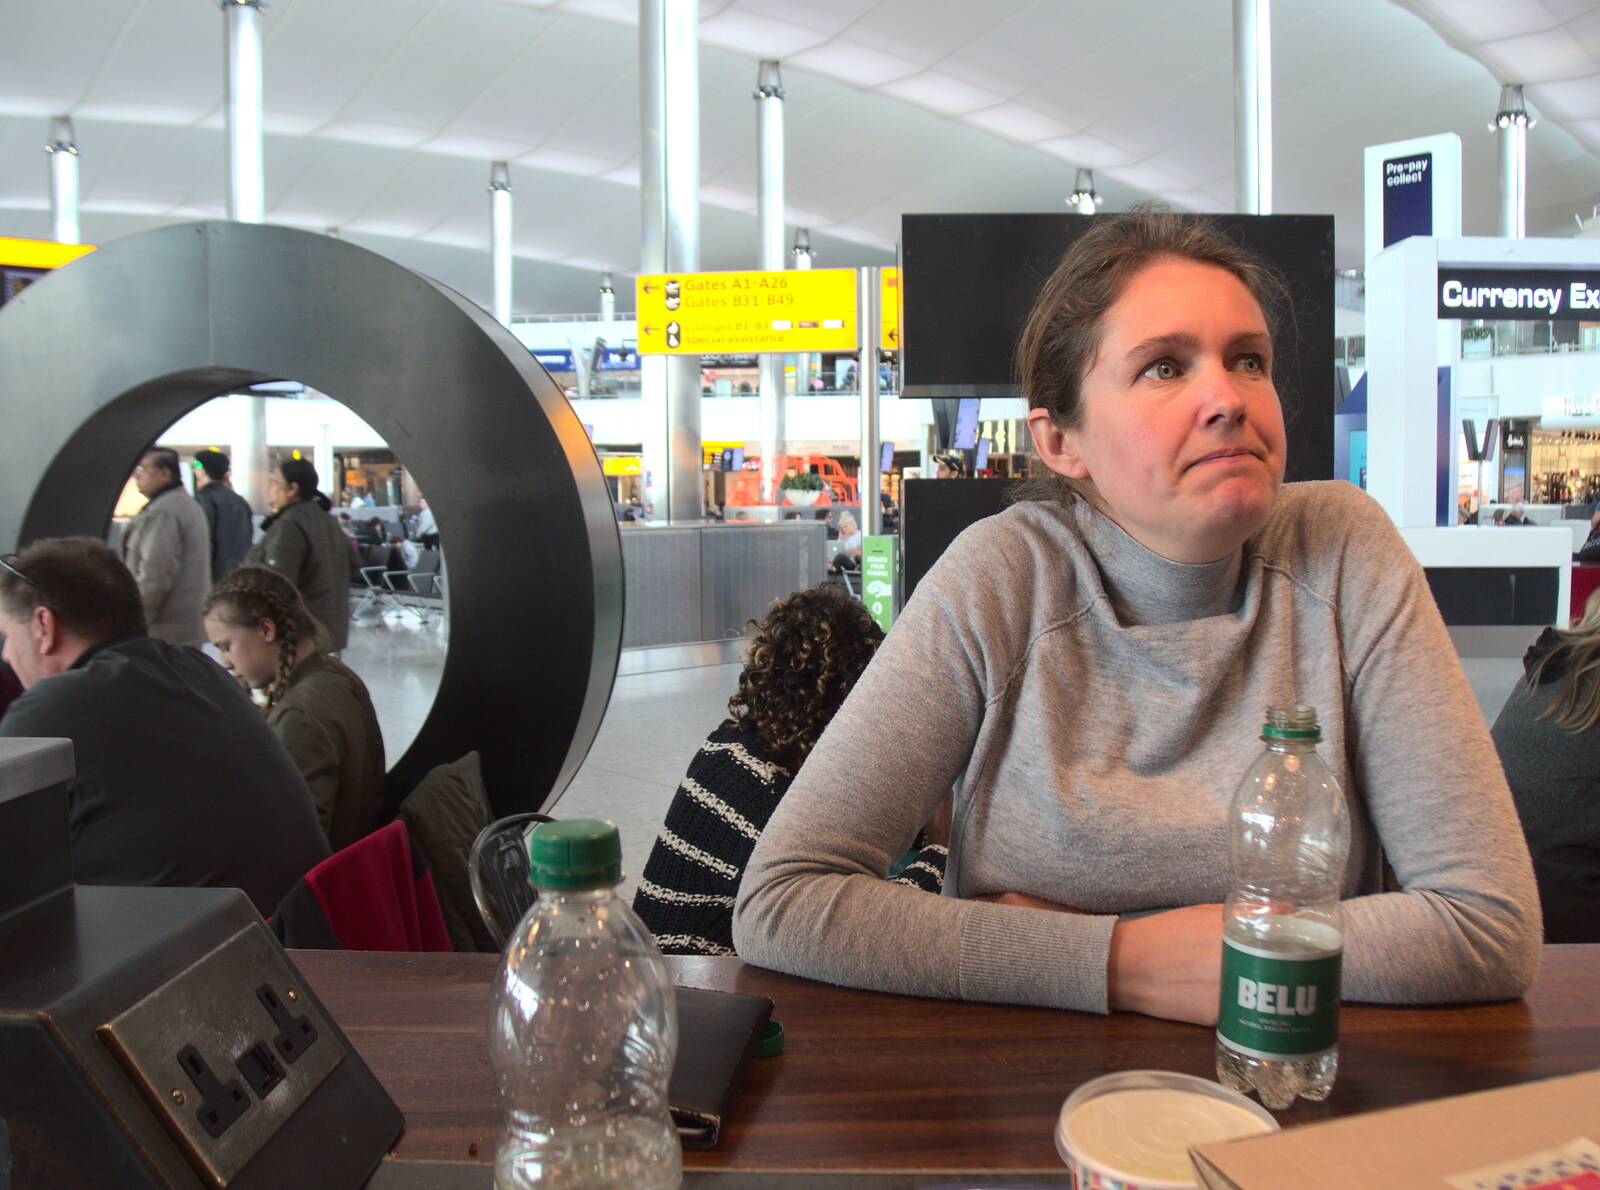 Isobel in Terminal 2 at Heathrow from A Trip to Reykjavik, Iceland - 20th April 2017